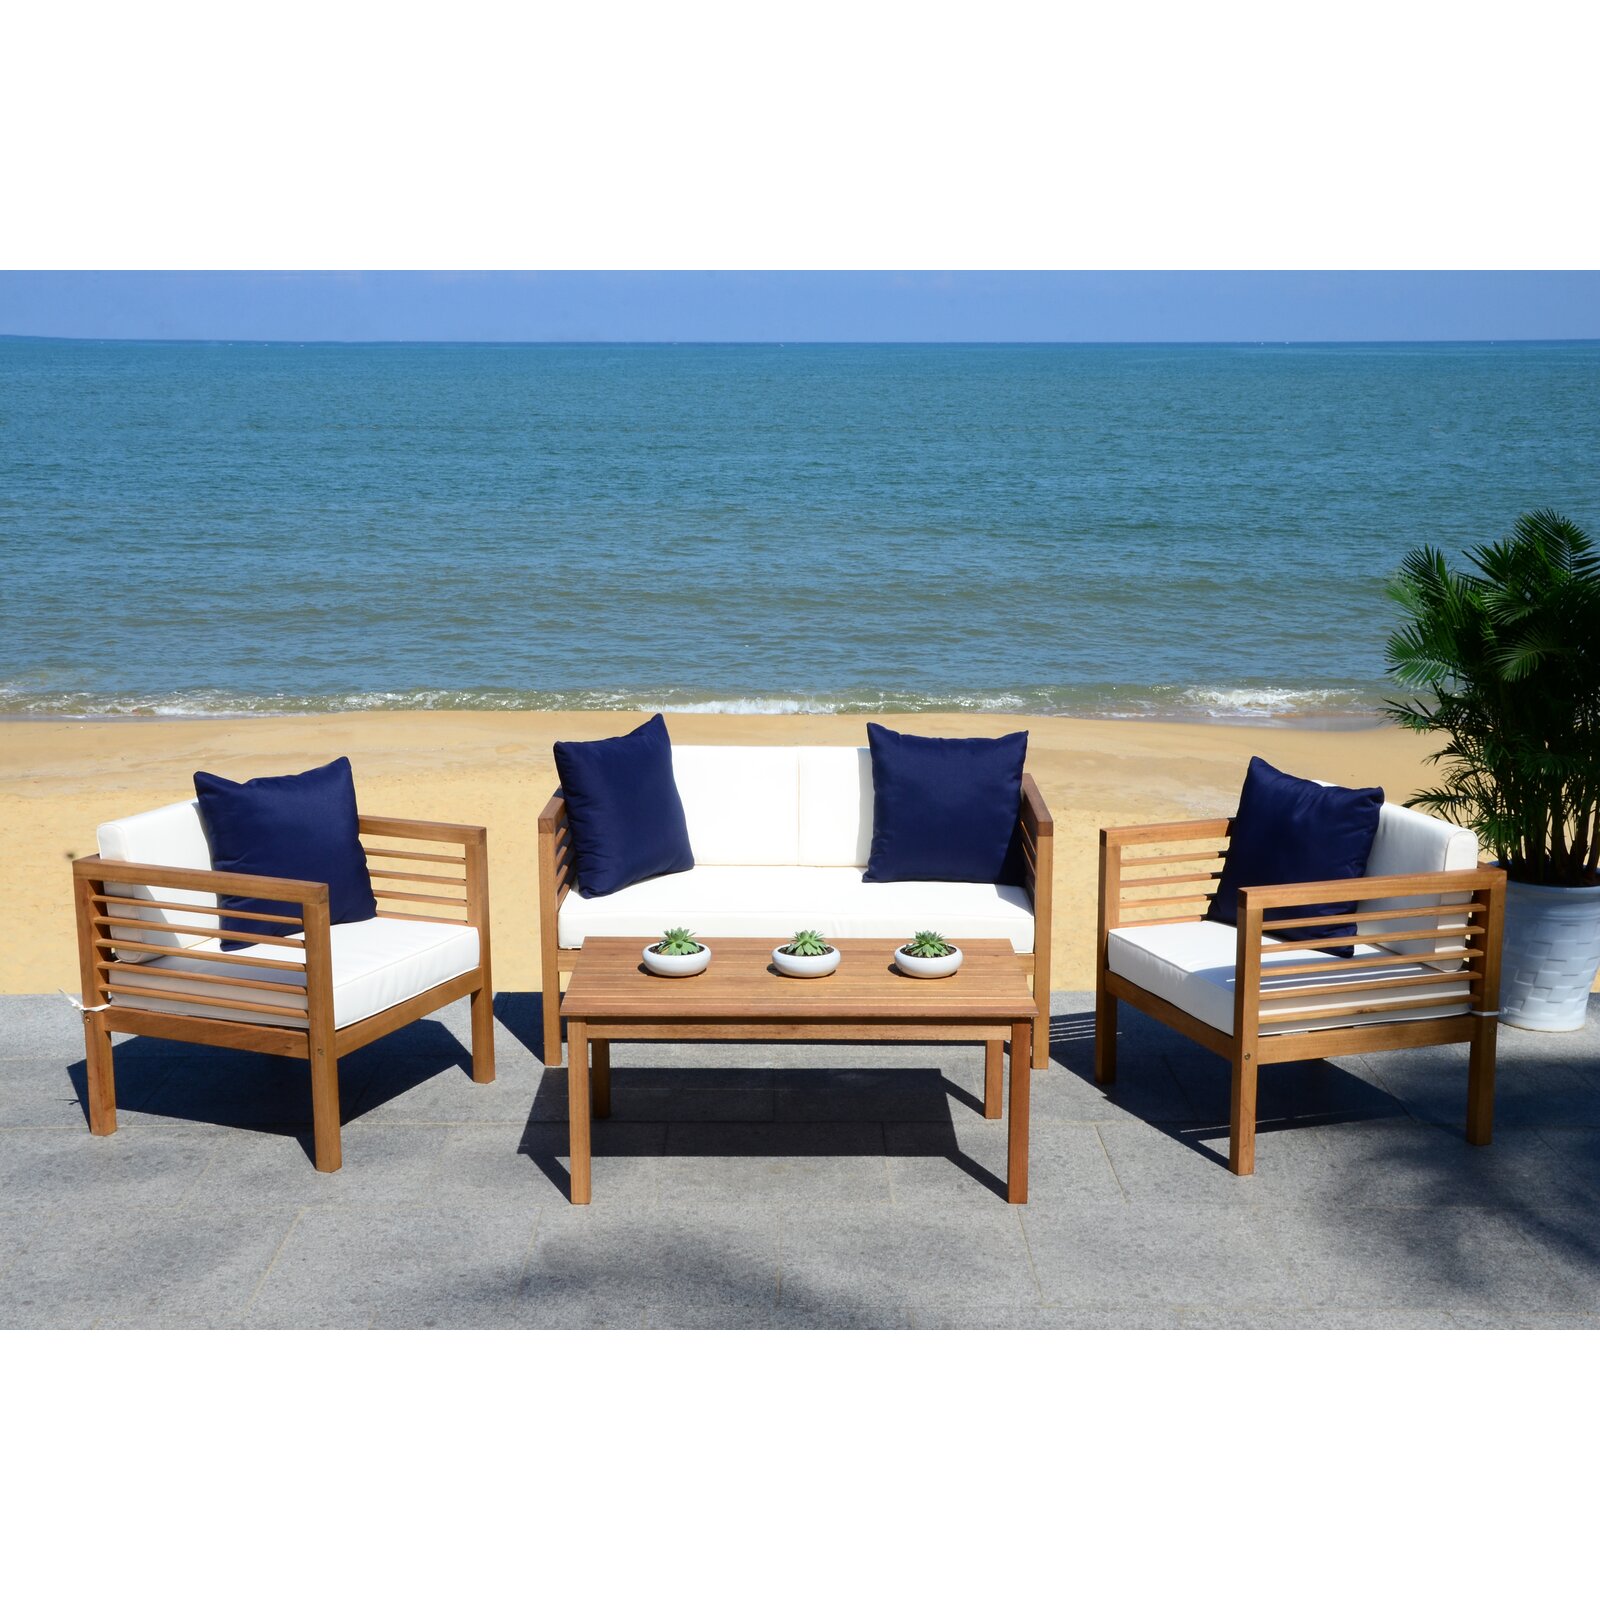 Dovecove Lovettsville Solid Wood 4 - Person Seating Group with Cushions & Reviews